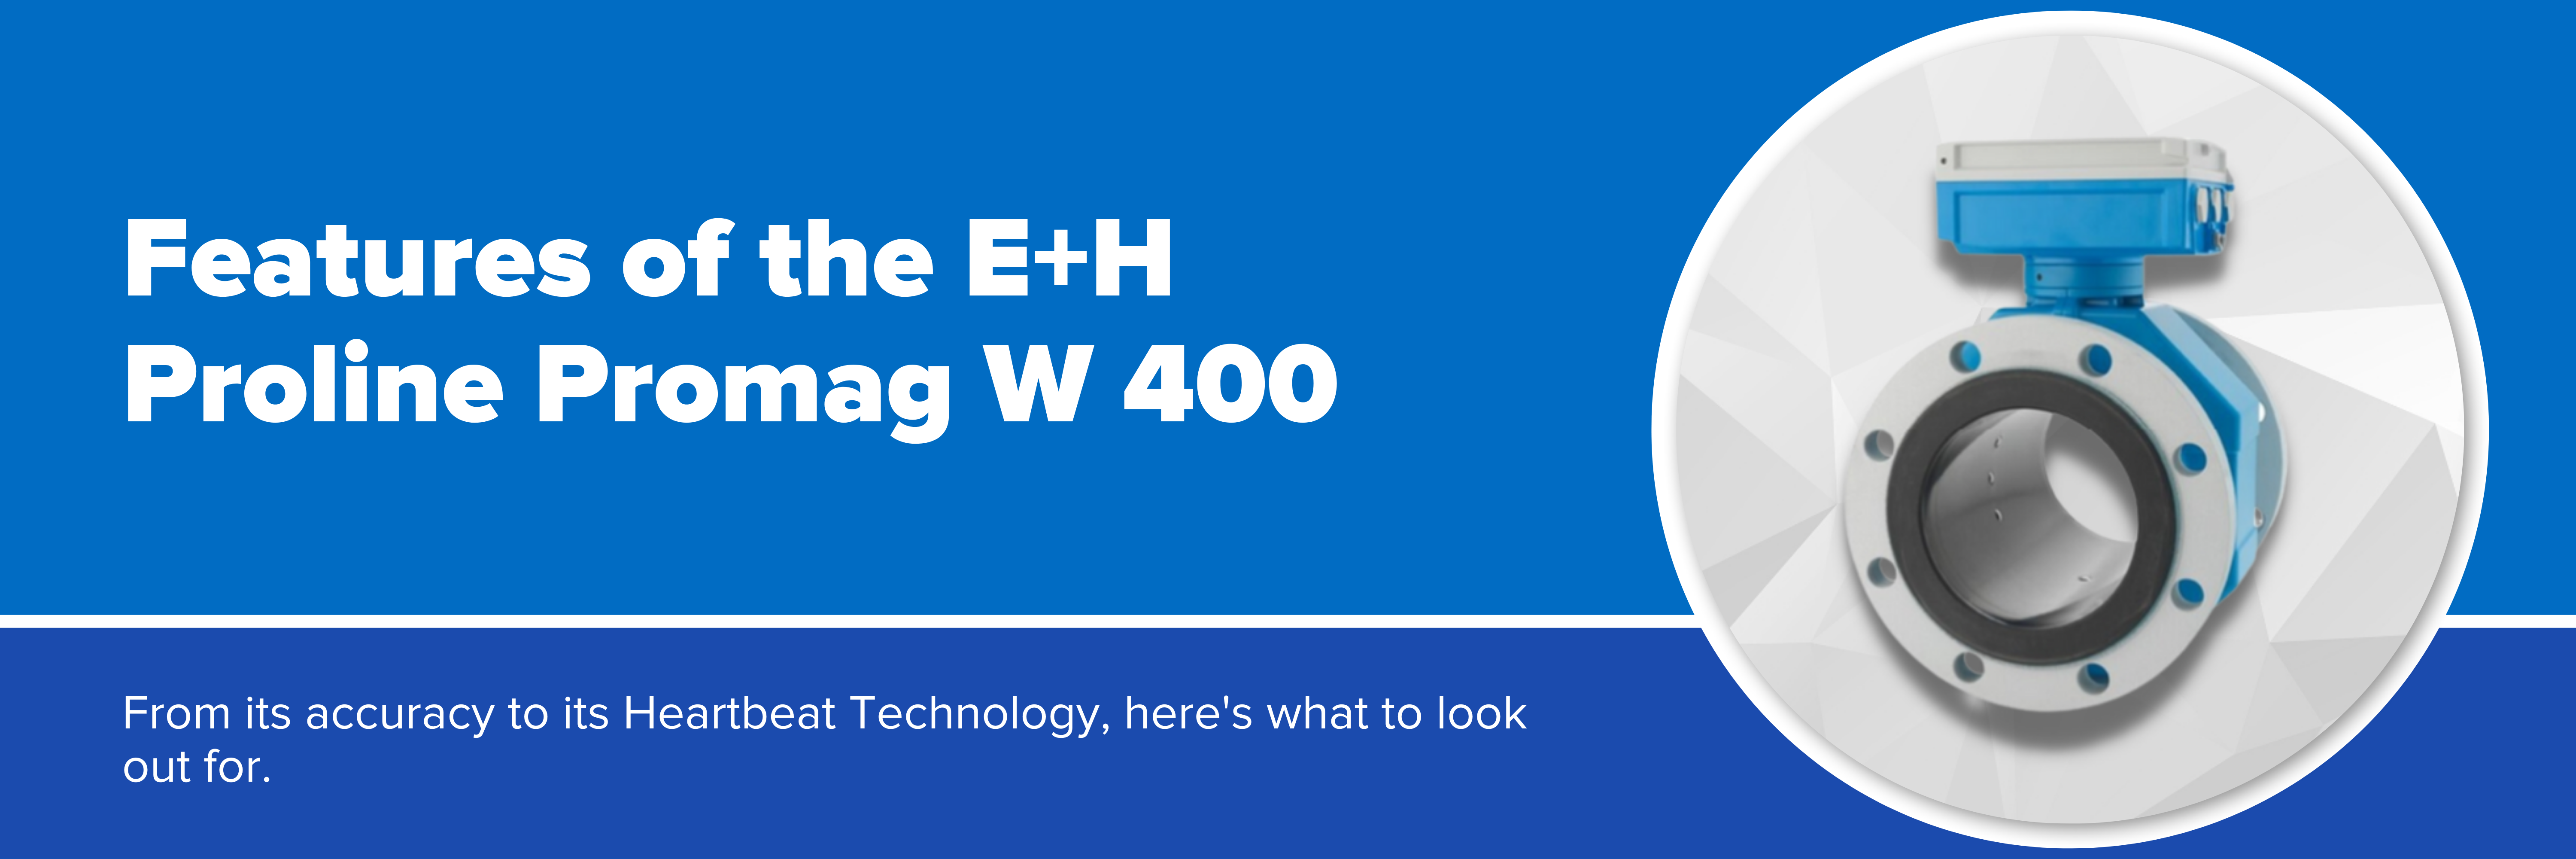 Header image with text "Features of the E+H Proline Promag W 400"